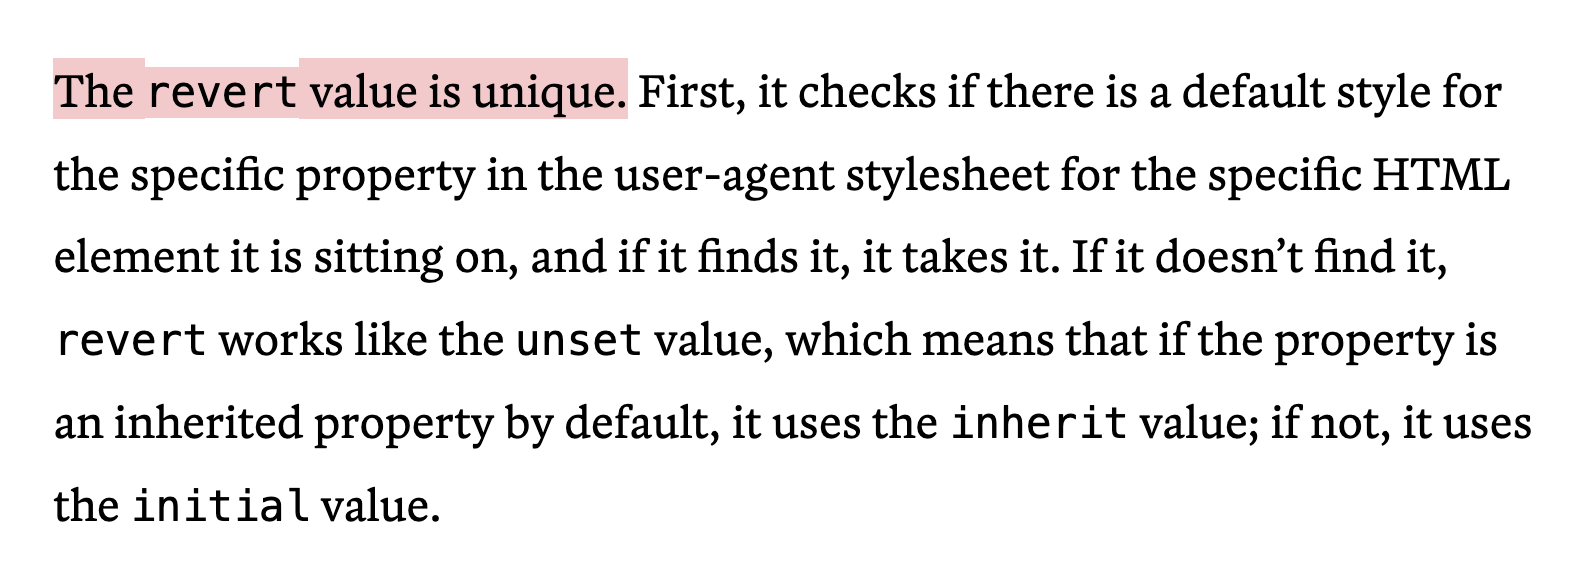 The revert value is unique. First, it checks if there is a default style for the specific property in the user-agent stylesheet for the specific HTML element it is sitting on, and if it finds it, it takes it. If it doesn’t find it, revert works like the unset value, which means that if the property is an inherited property by default, it uses the inherit value; if not, it uses the initial value.